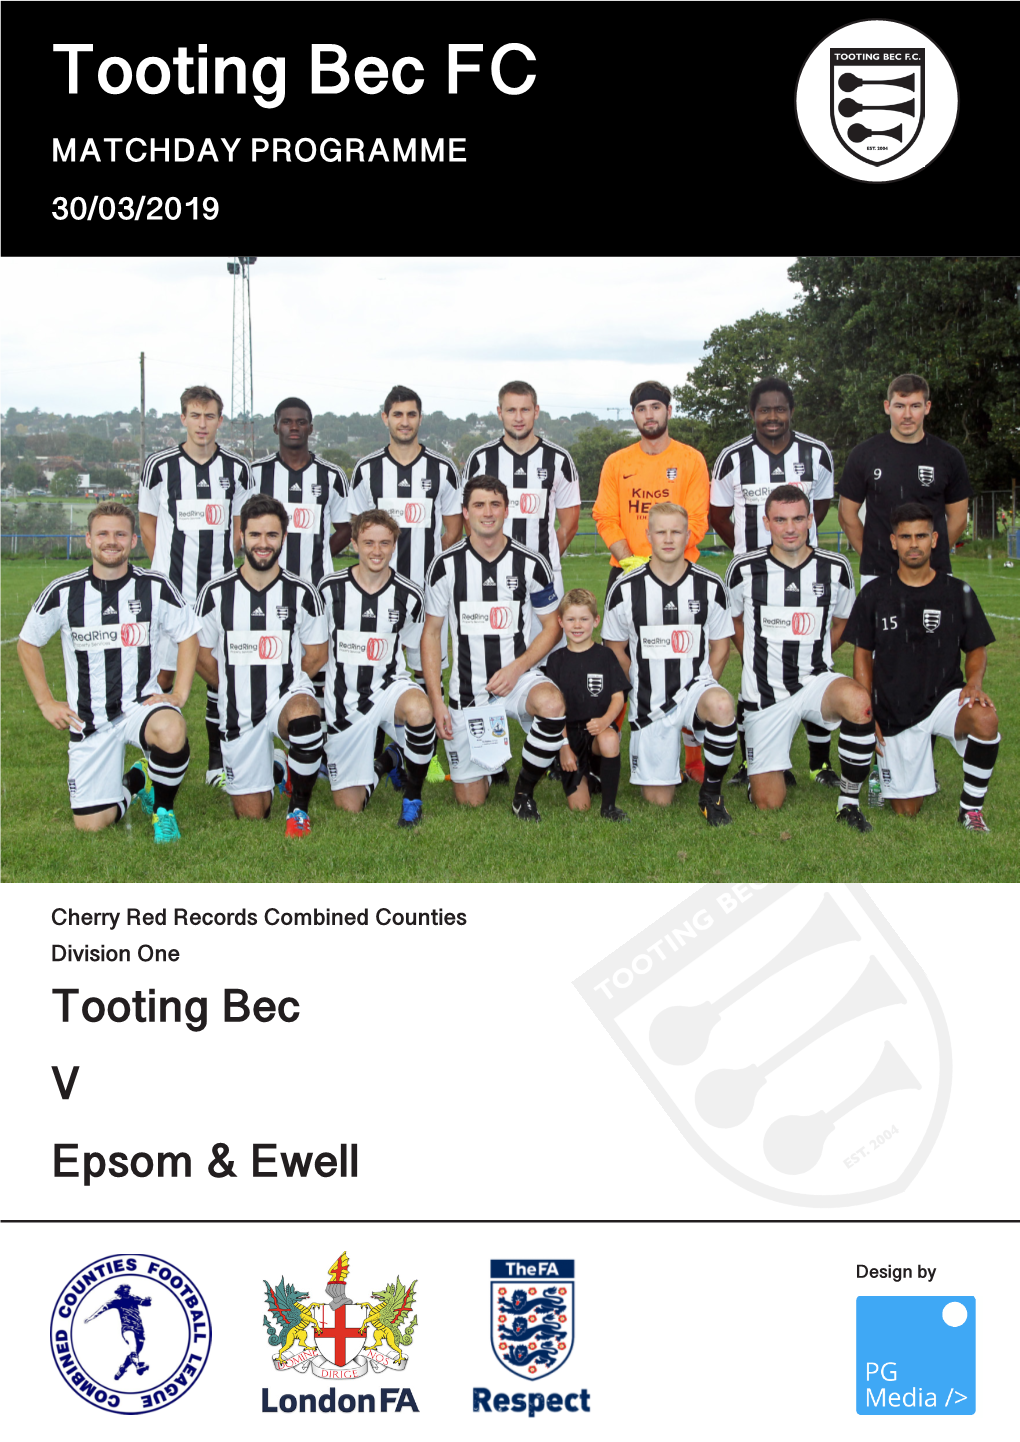 Tooting Bec FC MATCHDAY PROGRAMME 30/03/2019